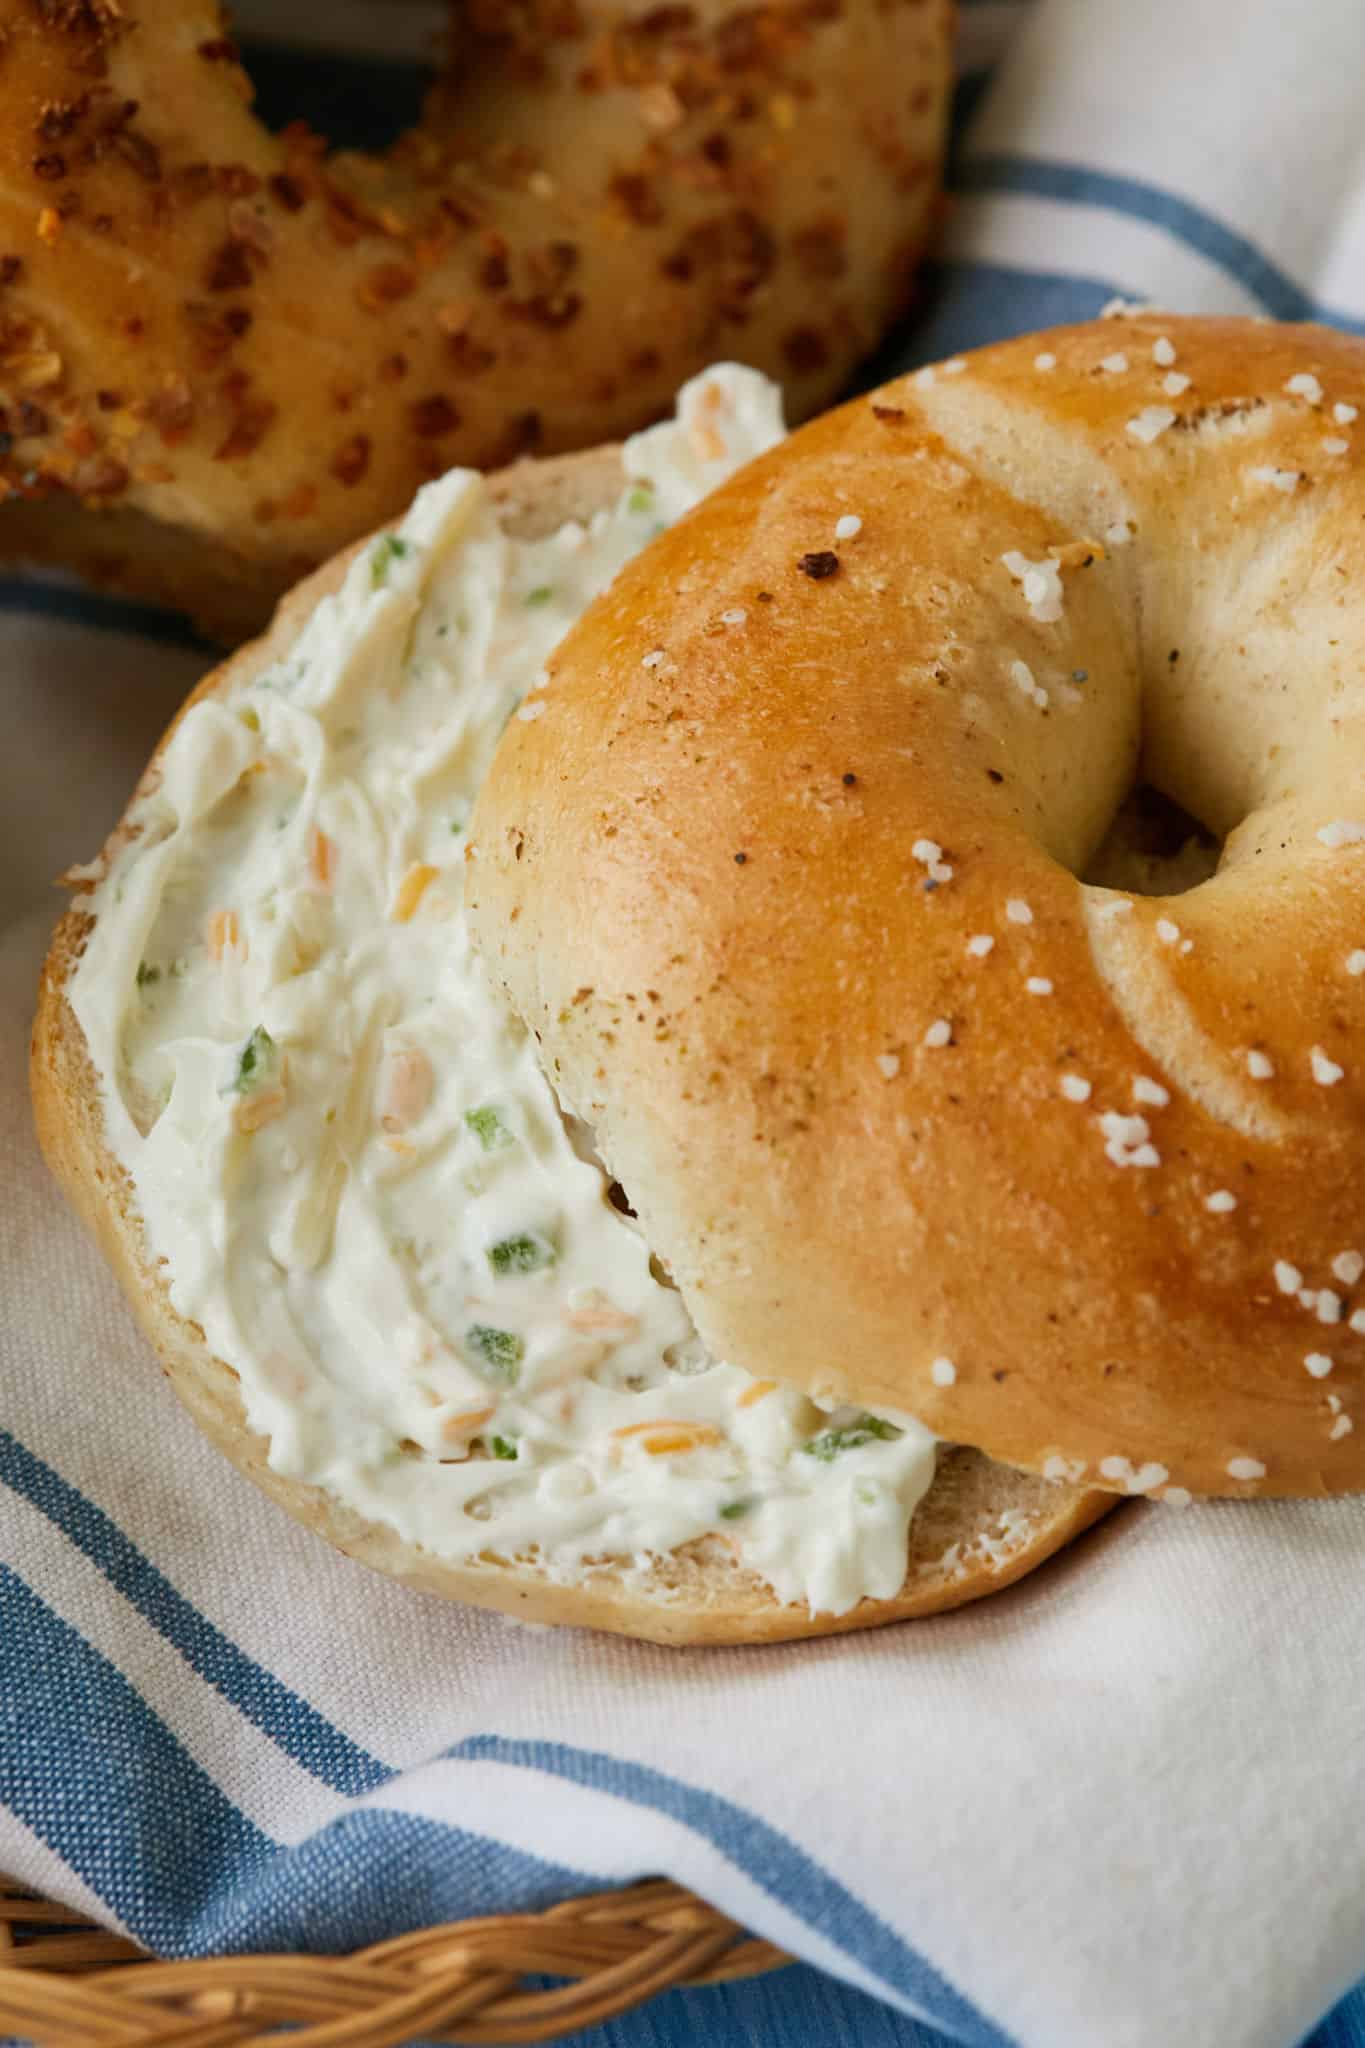 A salt bagel is cut in half and homemade jalapeno cheddar cream cheese is spread in the middle. An everything bagel sits behind the salt bagel.